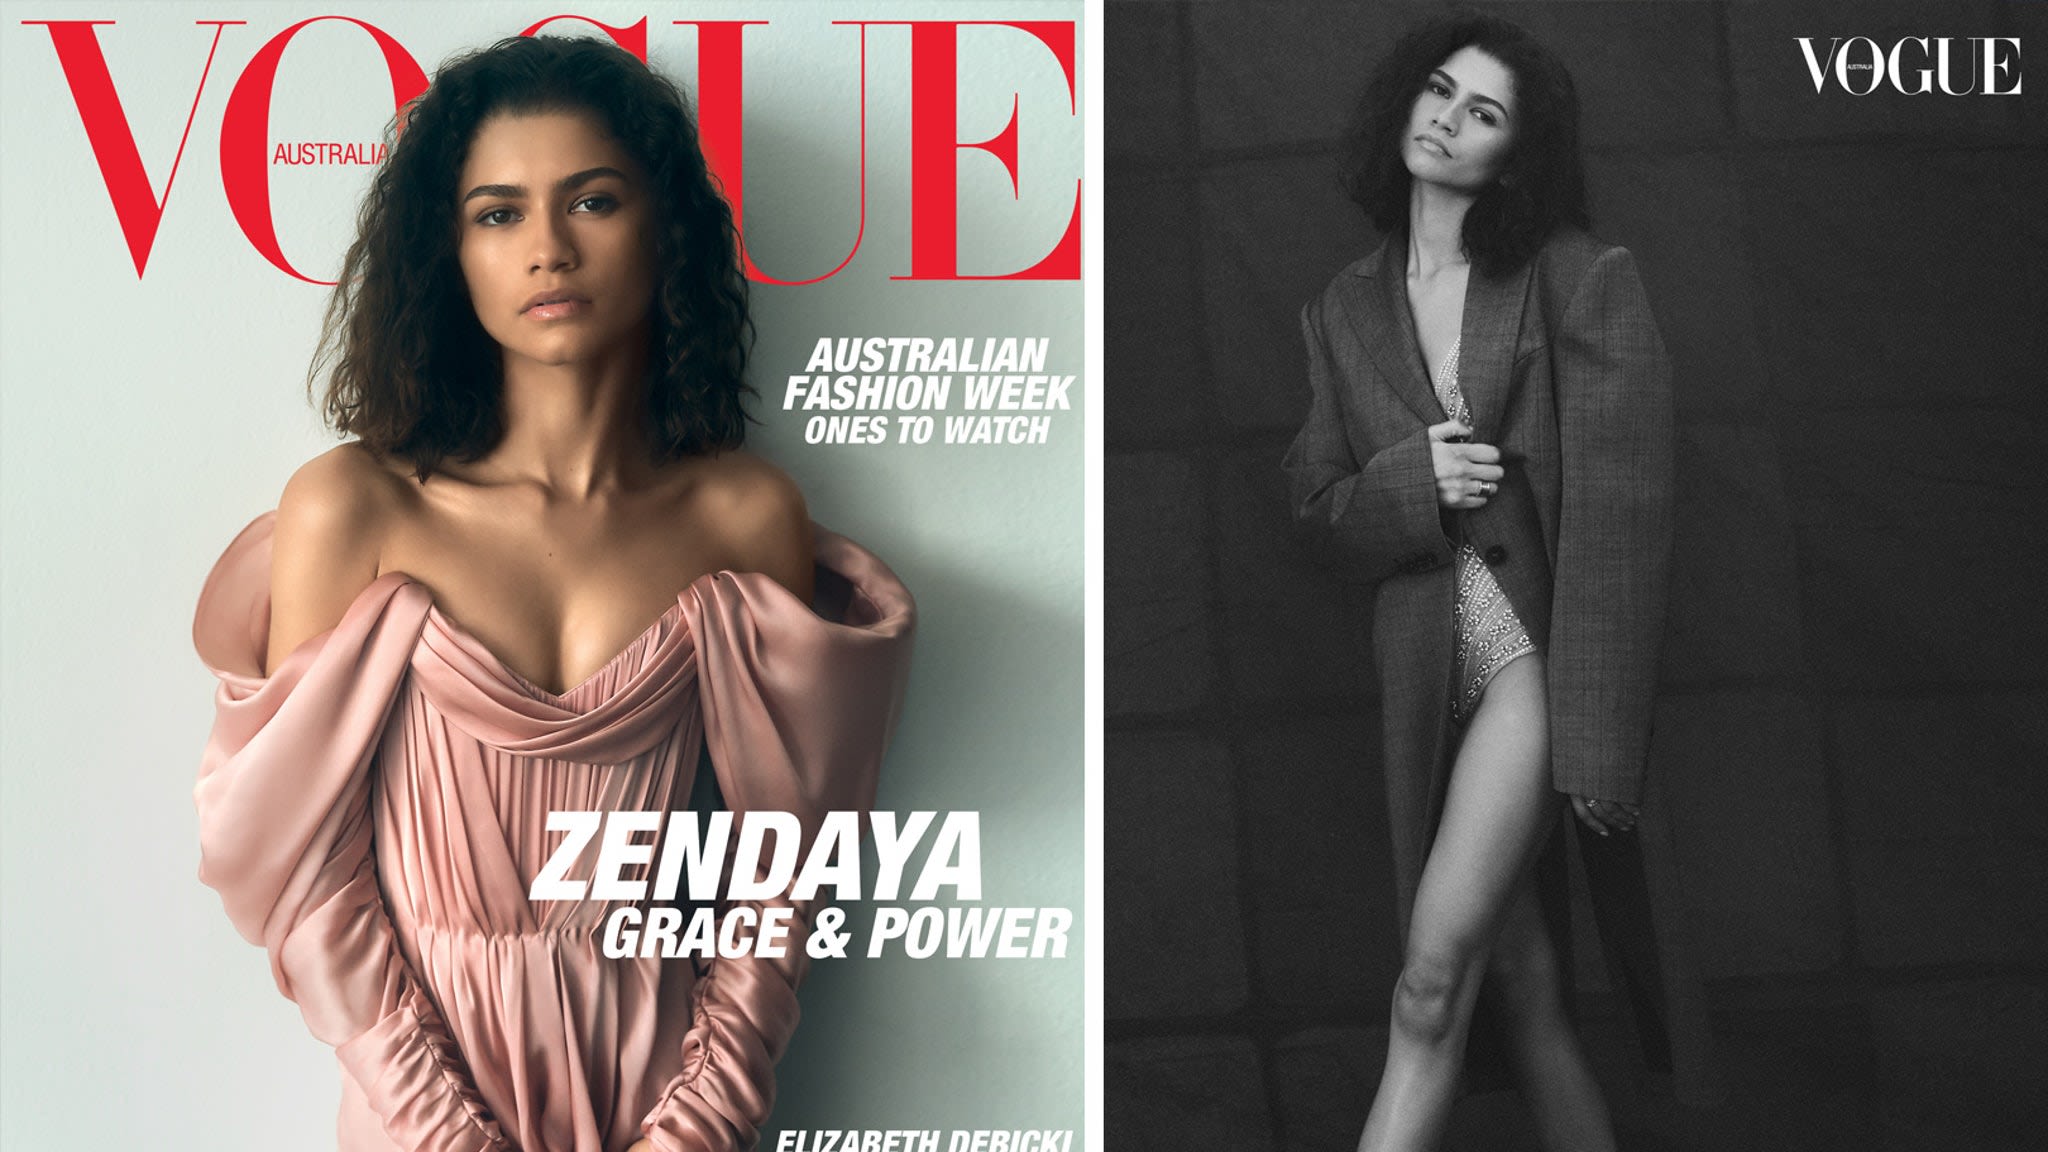 Zendaya Reflects on Euphoria Pause, Says It's Been 'Tough' Not Working